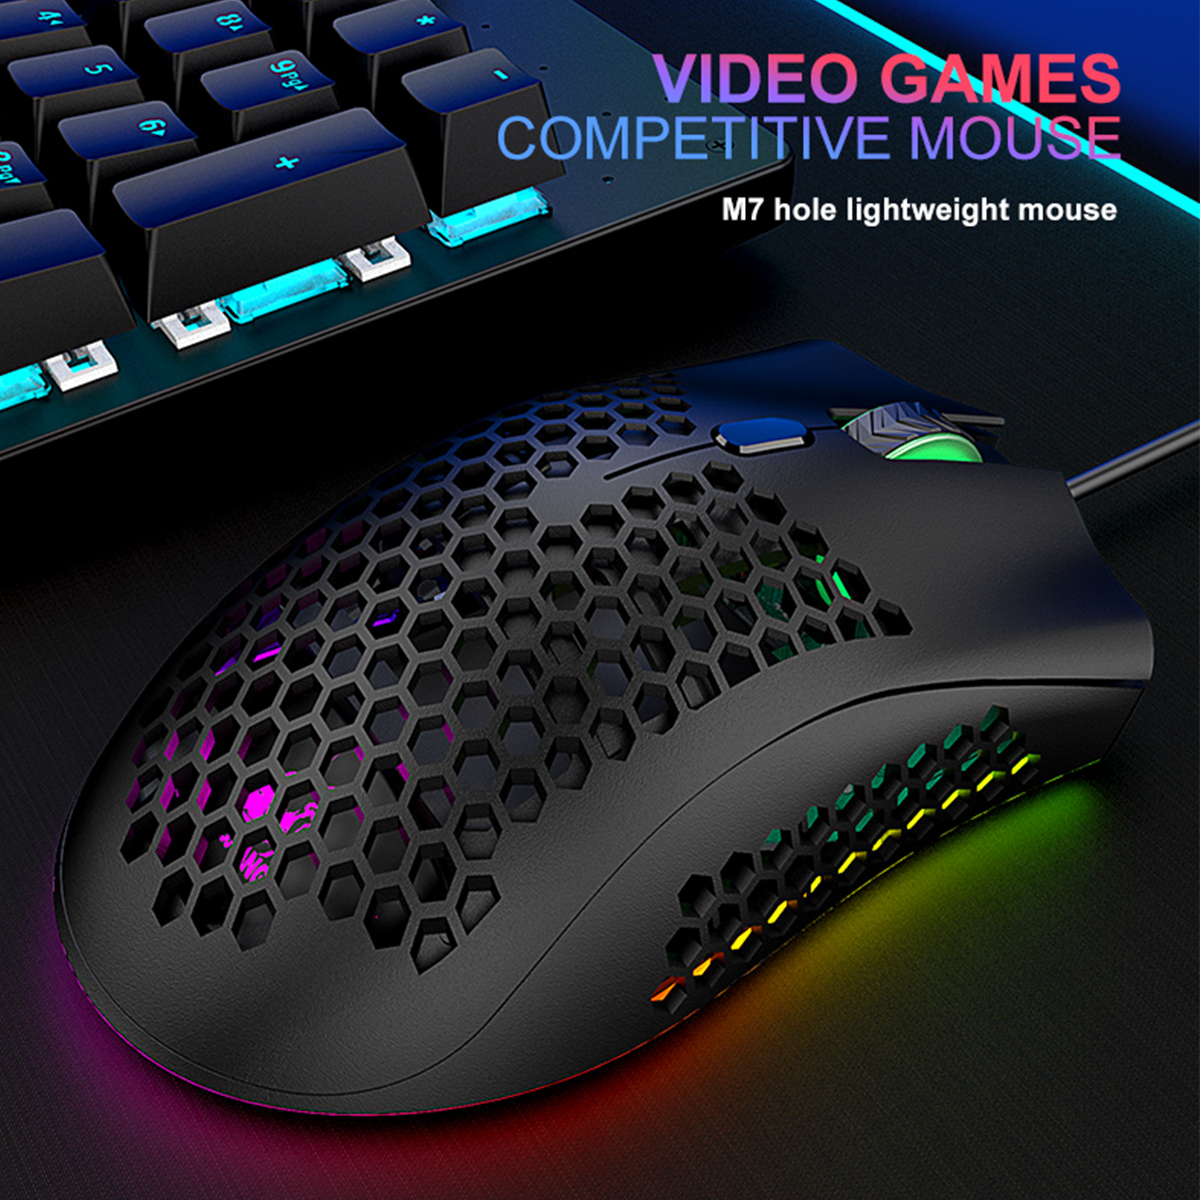 Wired-Gaming-Mouse-RGB-Lamp-12000DPI-Lightweight-For-LaptopDesktop-1740875-4